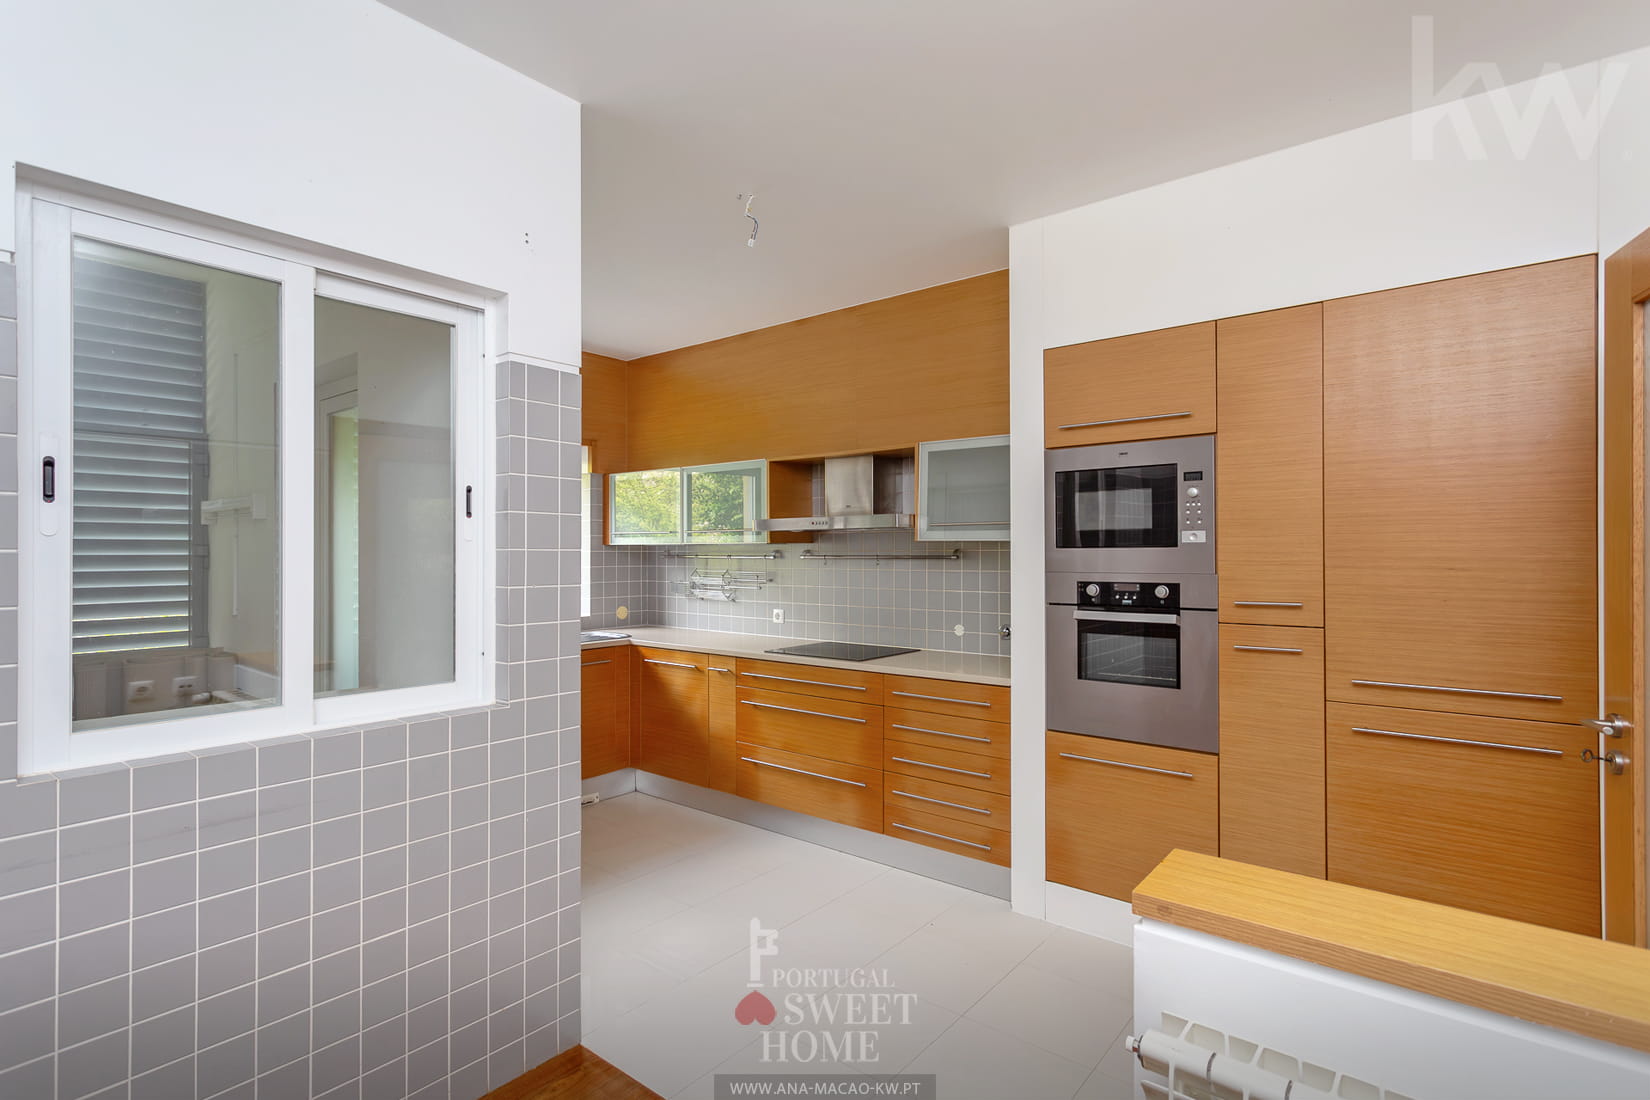 Fully equipped kitchen (13.9 m²) 